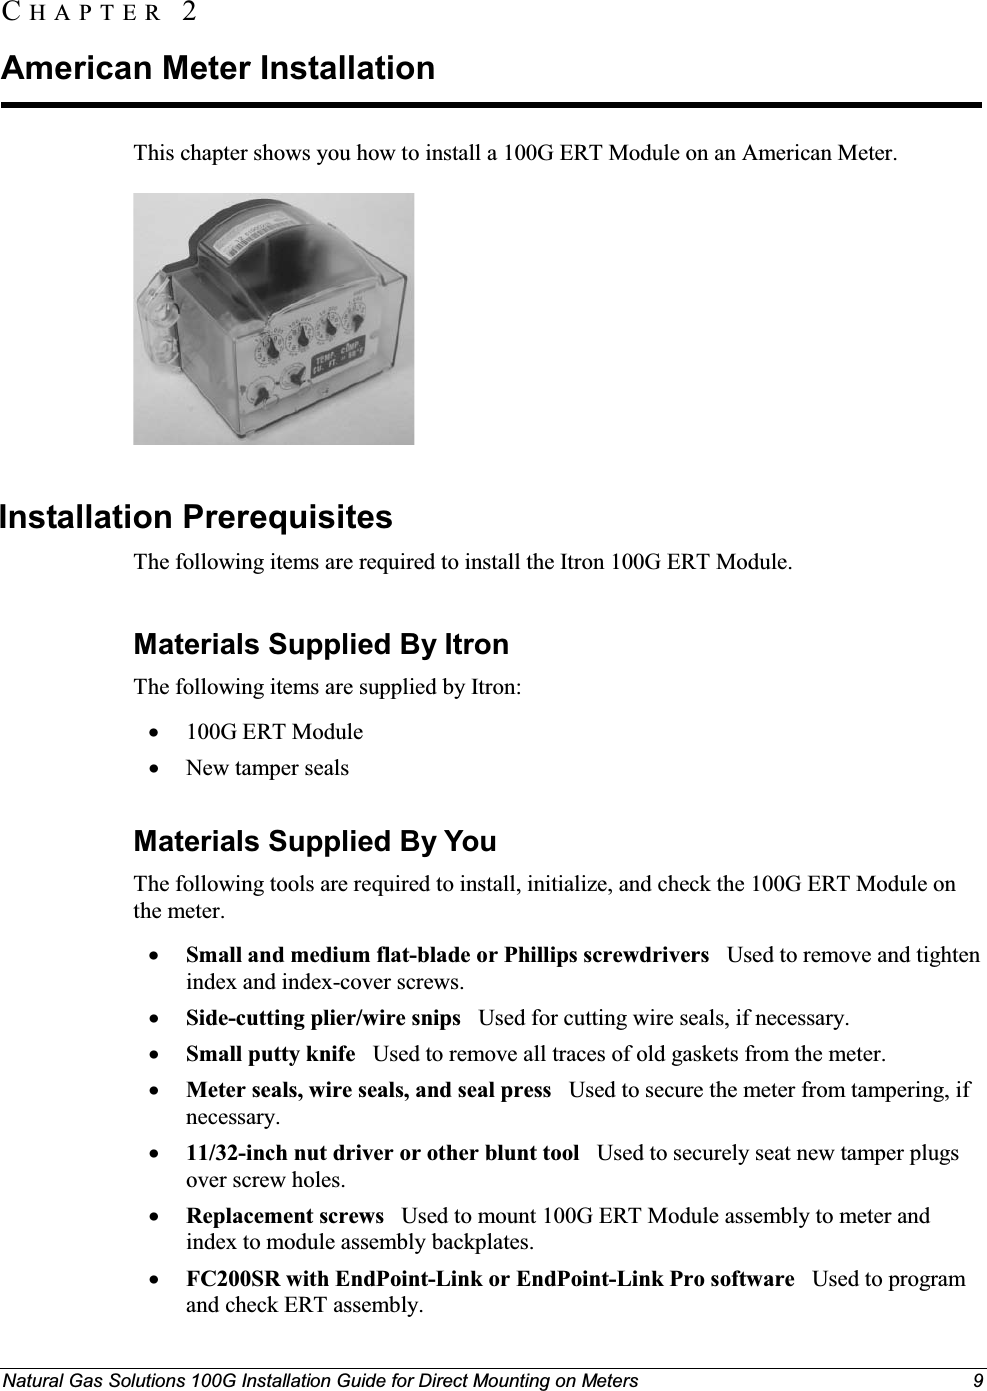 Natural Gas Solutions 100G Installation Guide for Direct Mounting on Meters 9 This chapter shows you how to install a 100G ERT Module on an American Meter. Installation Prerequisites The following items are required to install the Itron 100G ERT Module. Materials Supplied By ItronThe following items are supplied by Itron: x100G ERT ModulexNew tamper sealsMaterials Supplied By YouThe following tools are required to install, initialize, and check the 100G ERT Module on the meter.xSmall and medium flat-blade or Phillips screwdrivers   Used to remove and tighten index and index-cover screws.xSide-cutting plier/wire snips Used for cutting wire seals, if necessary.xSmall putty knife Used to remove all traces of old gaskets from the meter. xMeter seals, wire seals, and seal press   Used to secure the meter from tampering, if necessary.x11/32-inch nut driver or other blunt tool Used to securely seat new tamper plugs over screw holes. xReplacement screws  Used to mount 100G ERT Module assembly to meter and index to module assembly backplates.xFC200SR with EndPoint-Link or EndPoint-Link Pro software   Used to program  and check ERT assembly.CH A P T E R  2American Meter Installation 